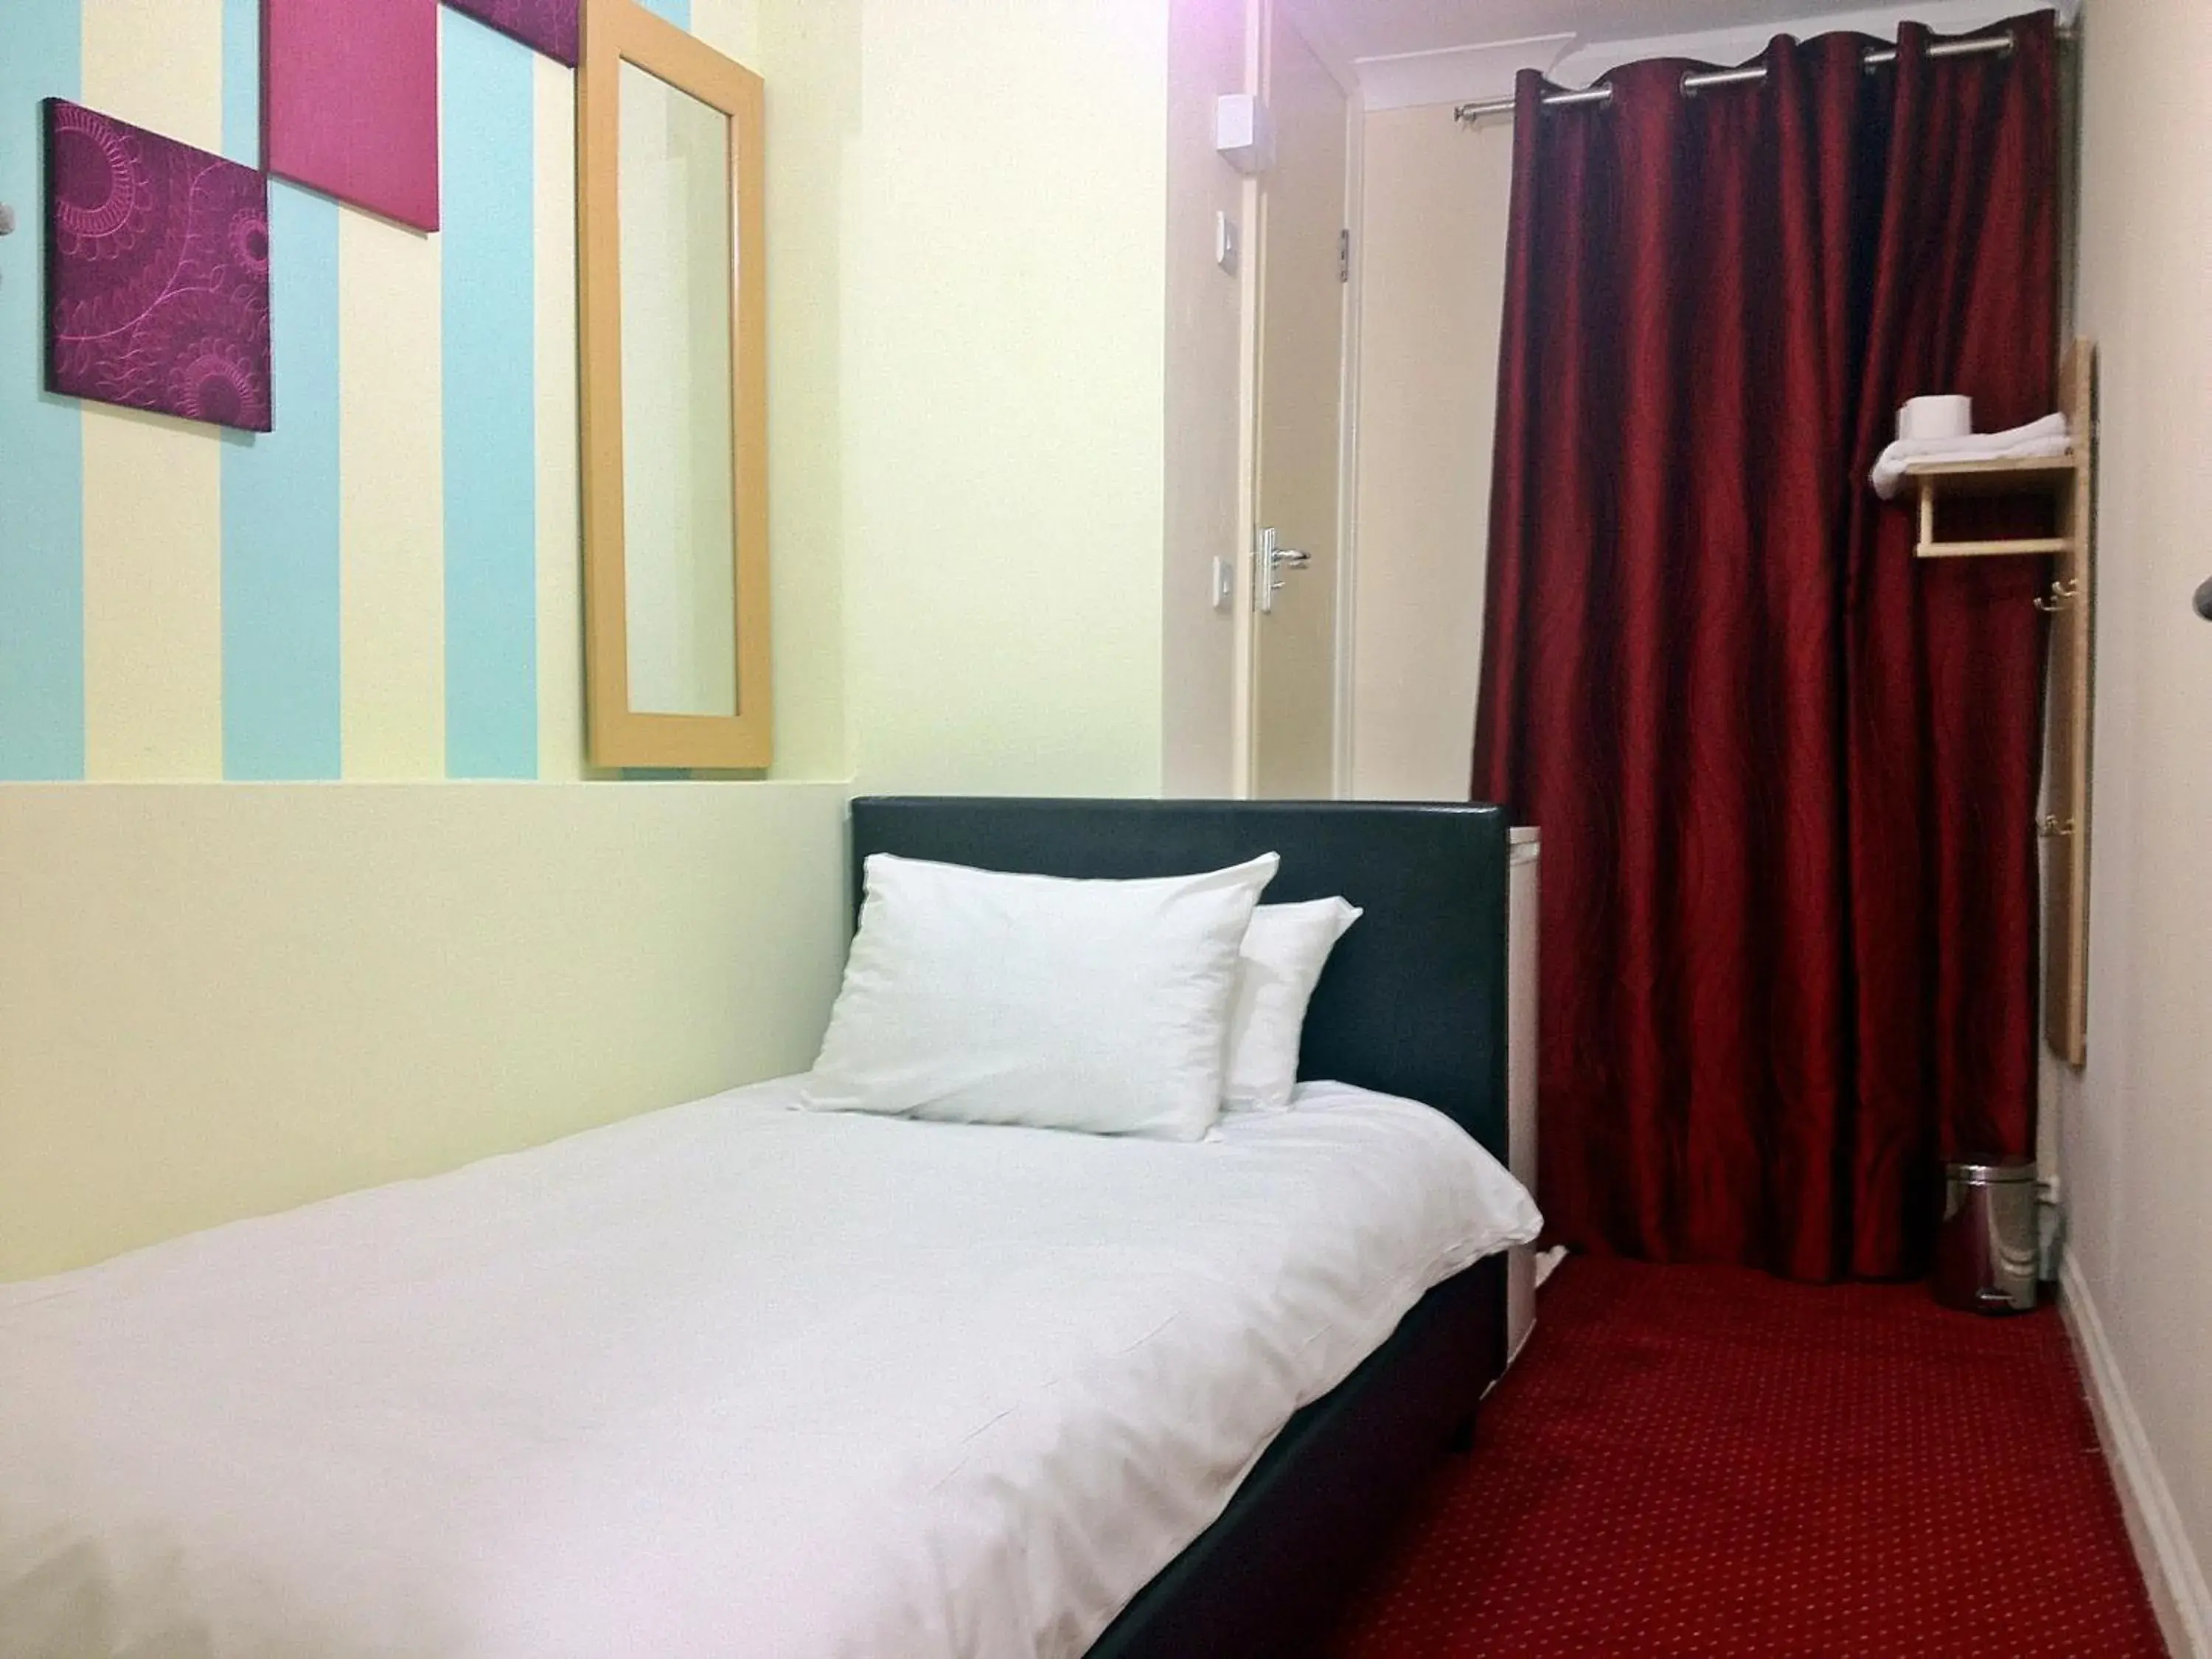 Bed in City View Hotel - Roman Road Market